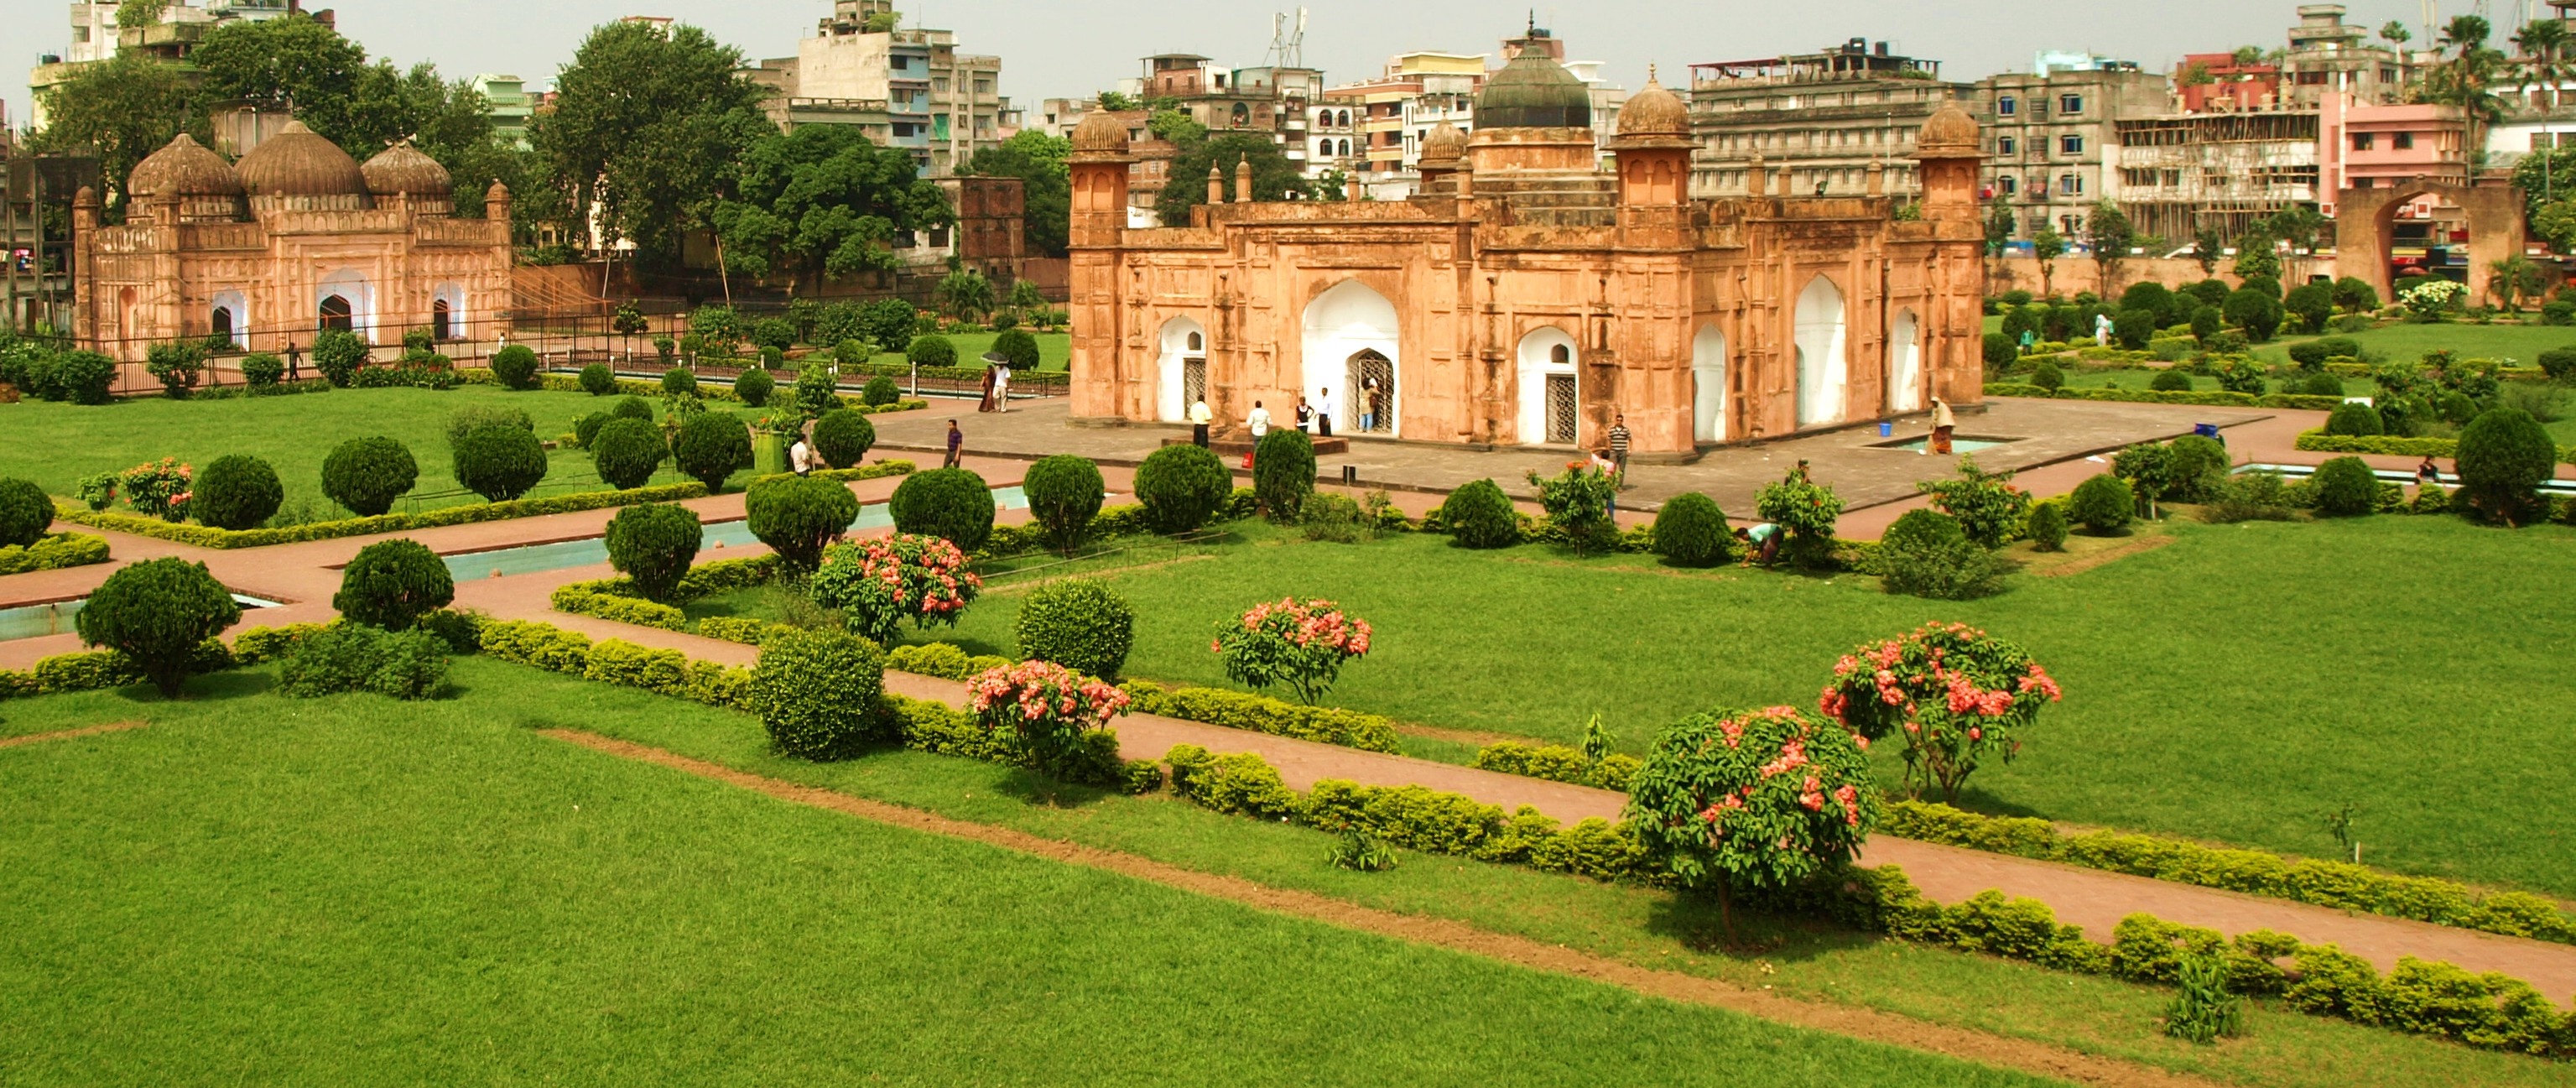 Bangladesh: Lalbagh Fort, A fort in the old city of Dhaka. 3080x1300 Dual Screen Background.